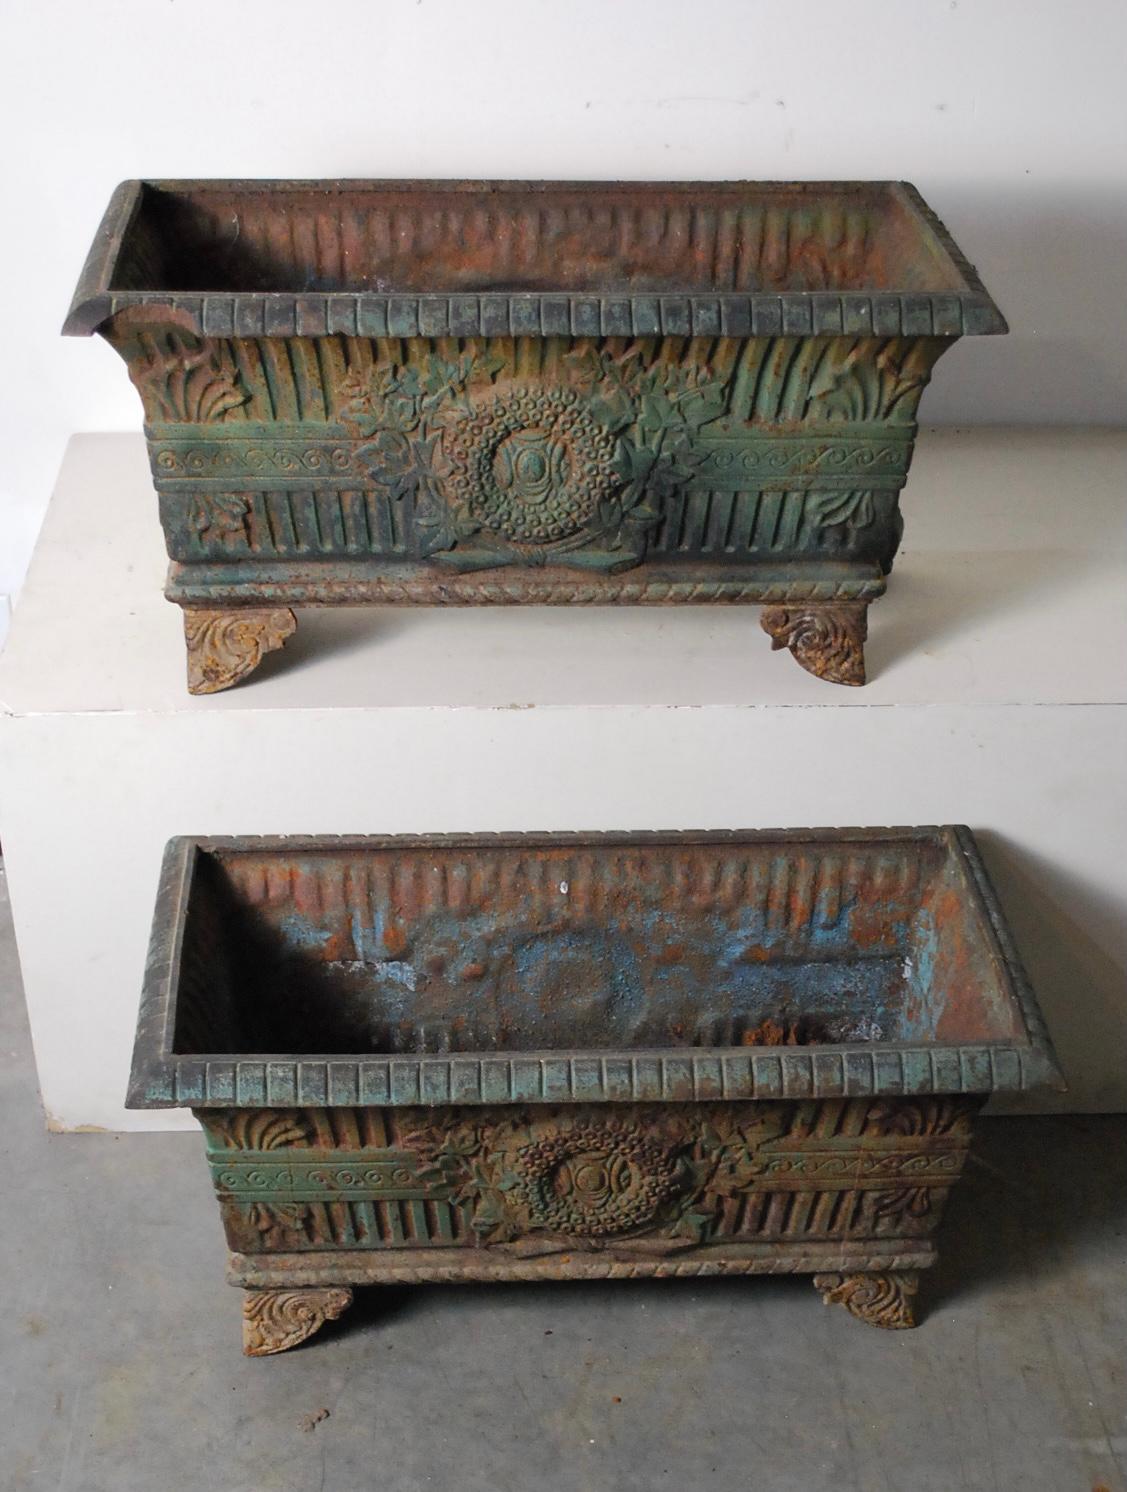 Pair of cast plater box urns with strong traces of decent colour, recently acquired from a private collection in Vancouver.
The urns were purchased in 1970 from an antique store in Buffalo. They are BTB from France.

You will notice a small piece